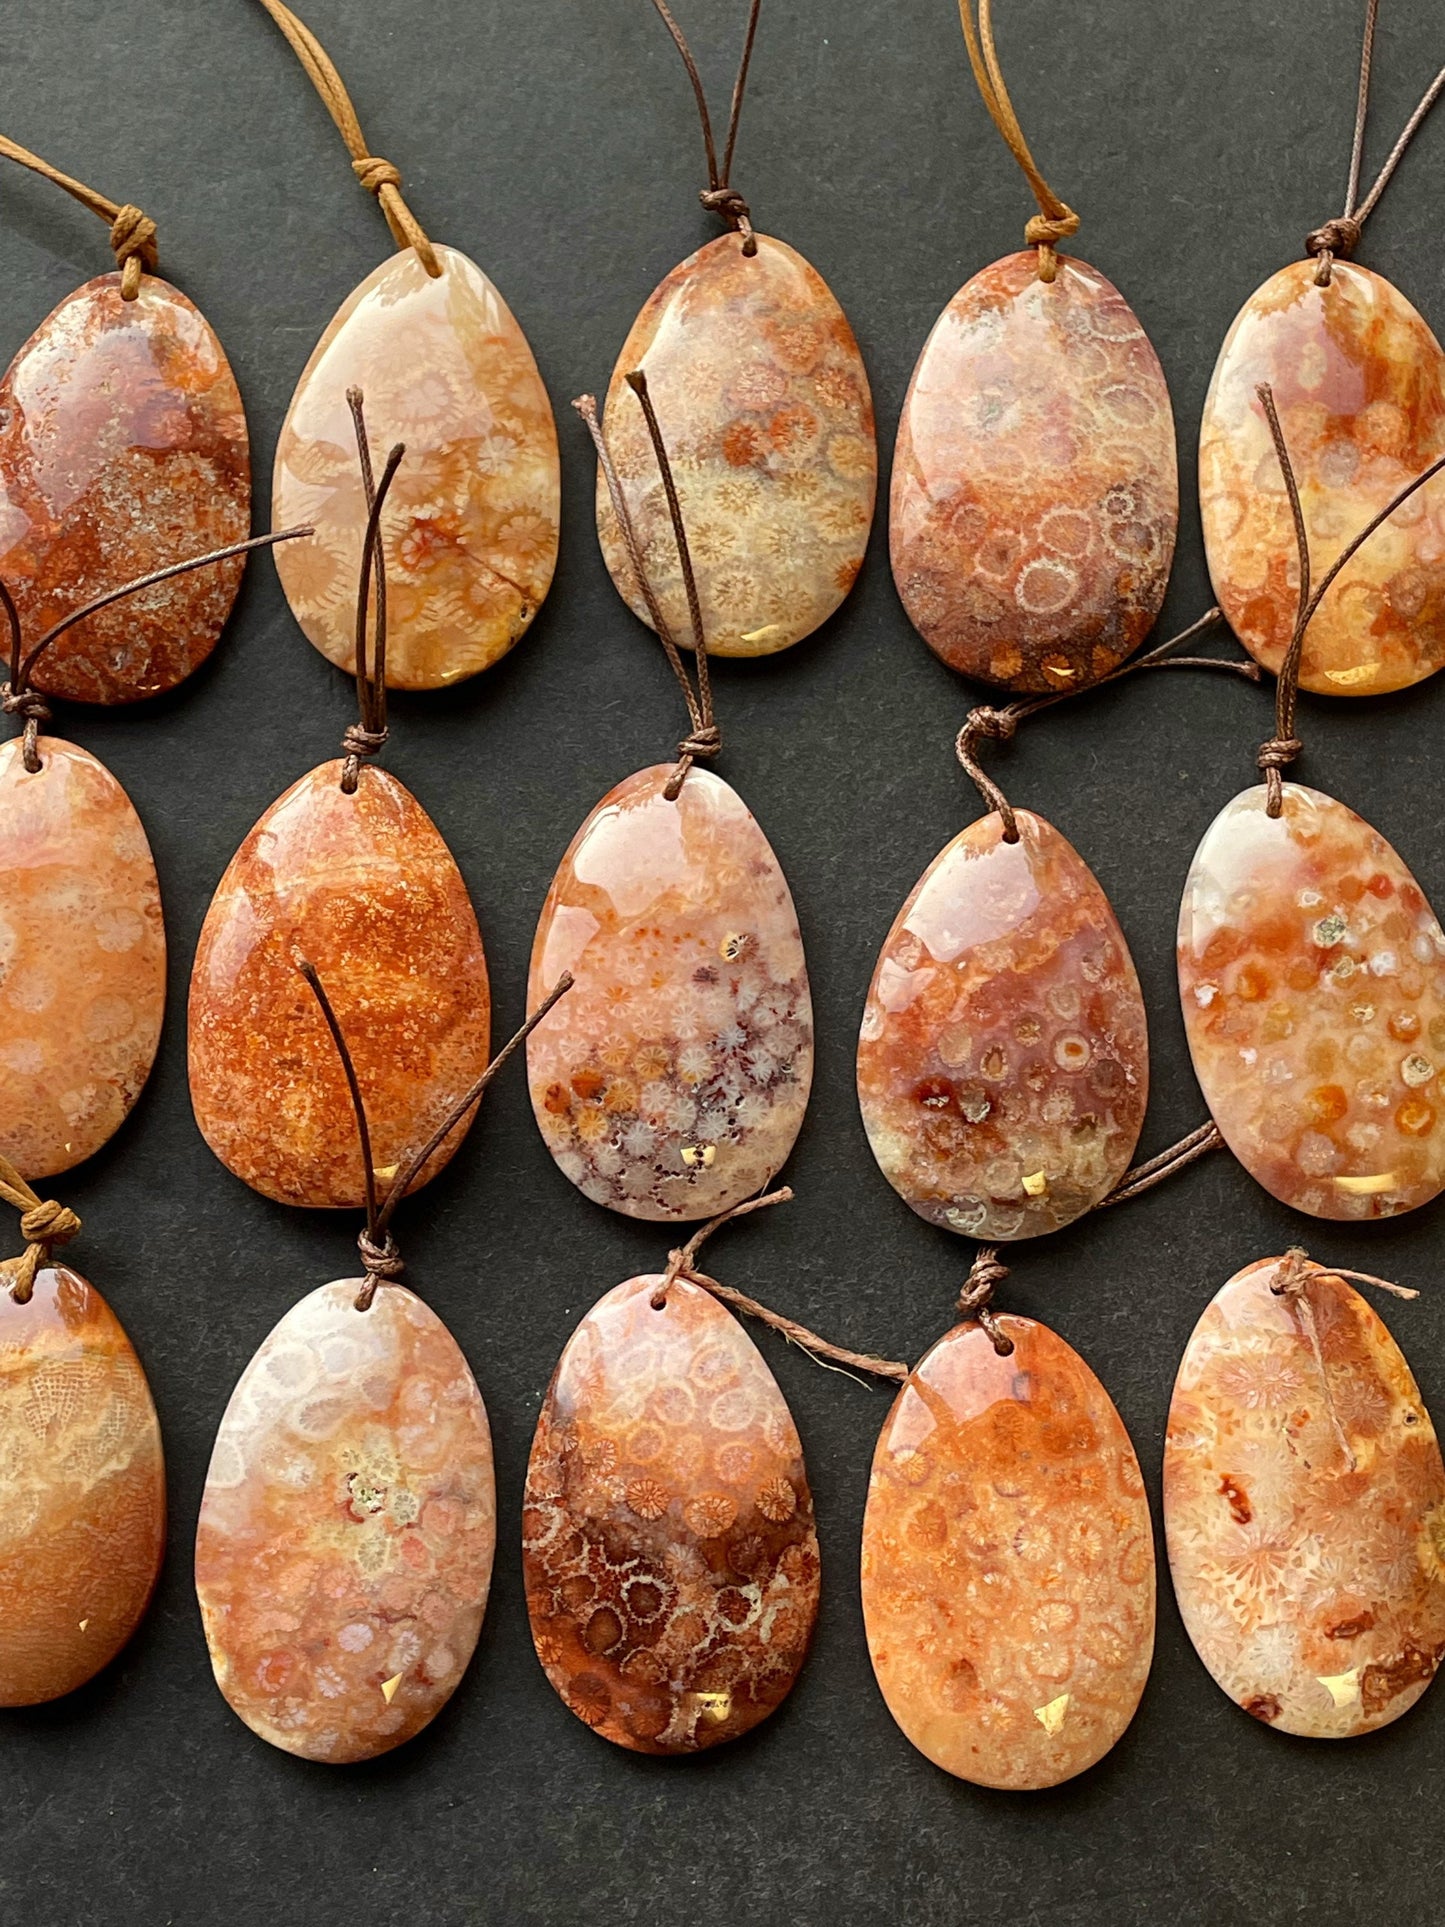 AAA Natural Fossil Coral Gemstone Pendant 30x50mm Teardrop Shape Pendant, Gorgeous Natural Orange Brown Fossil Coral Pendant